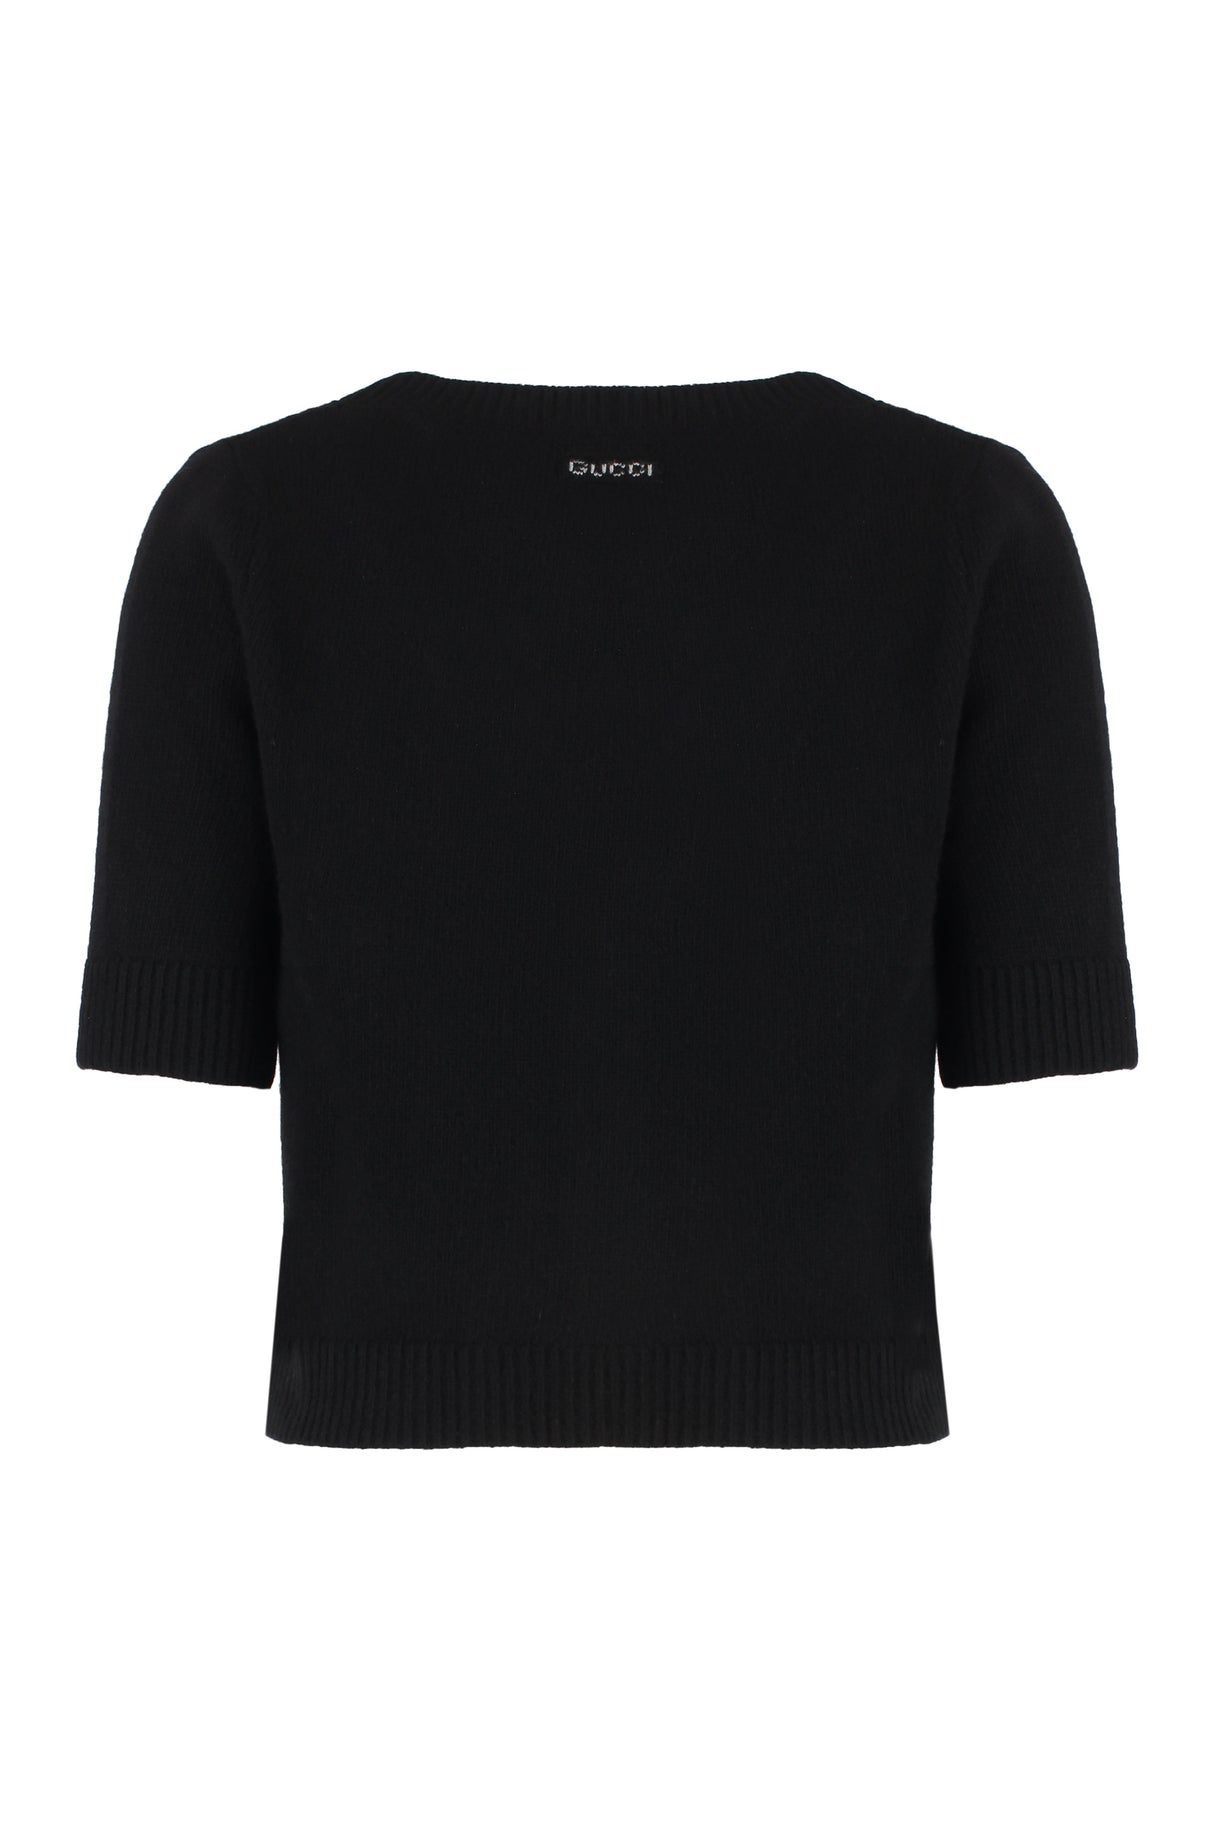 GUCCI Black Wool and Cashmere Cropped Cardigan